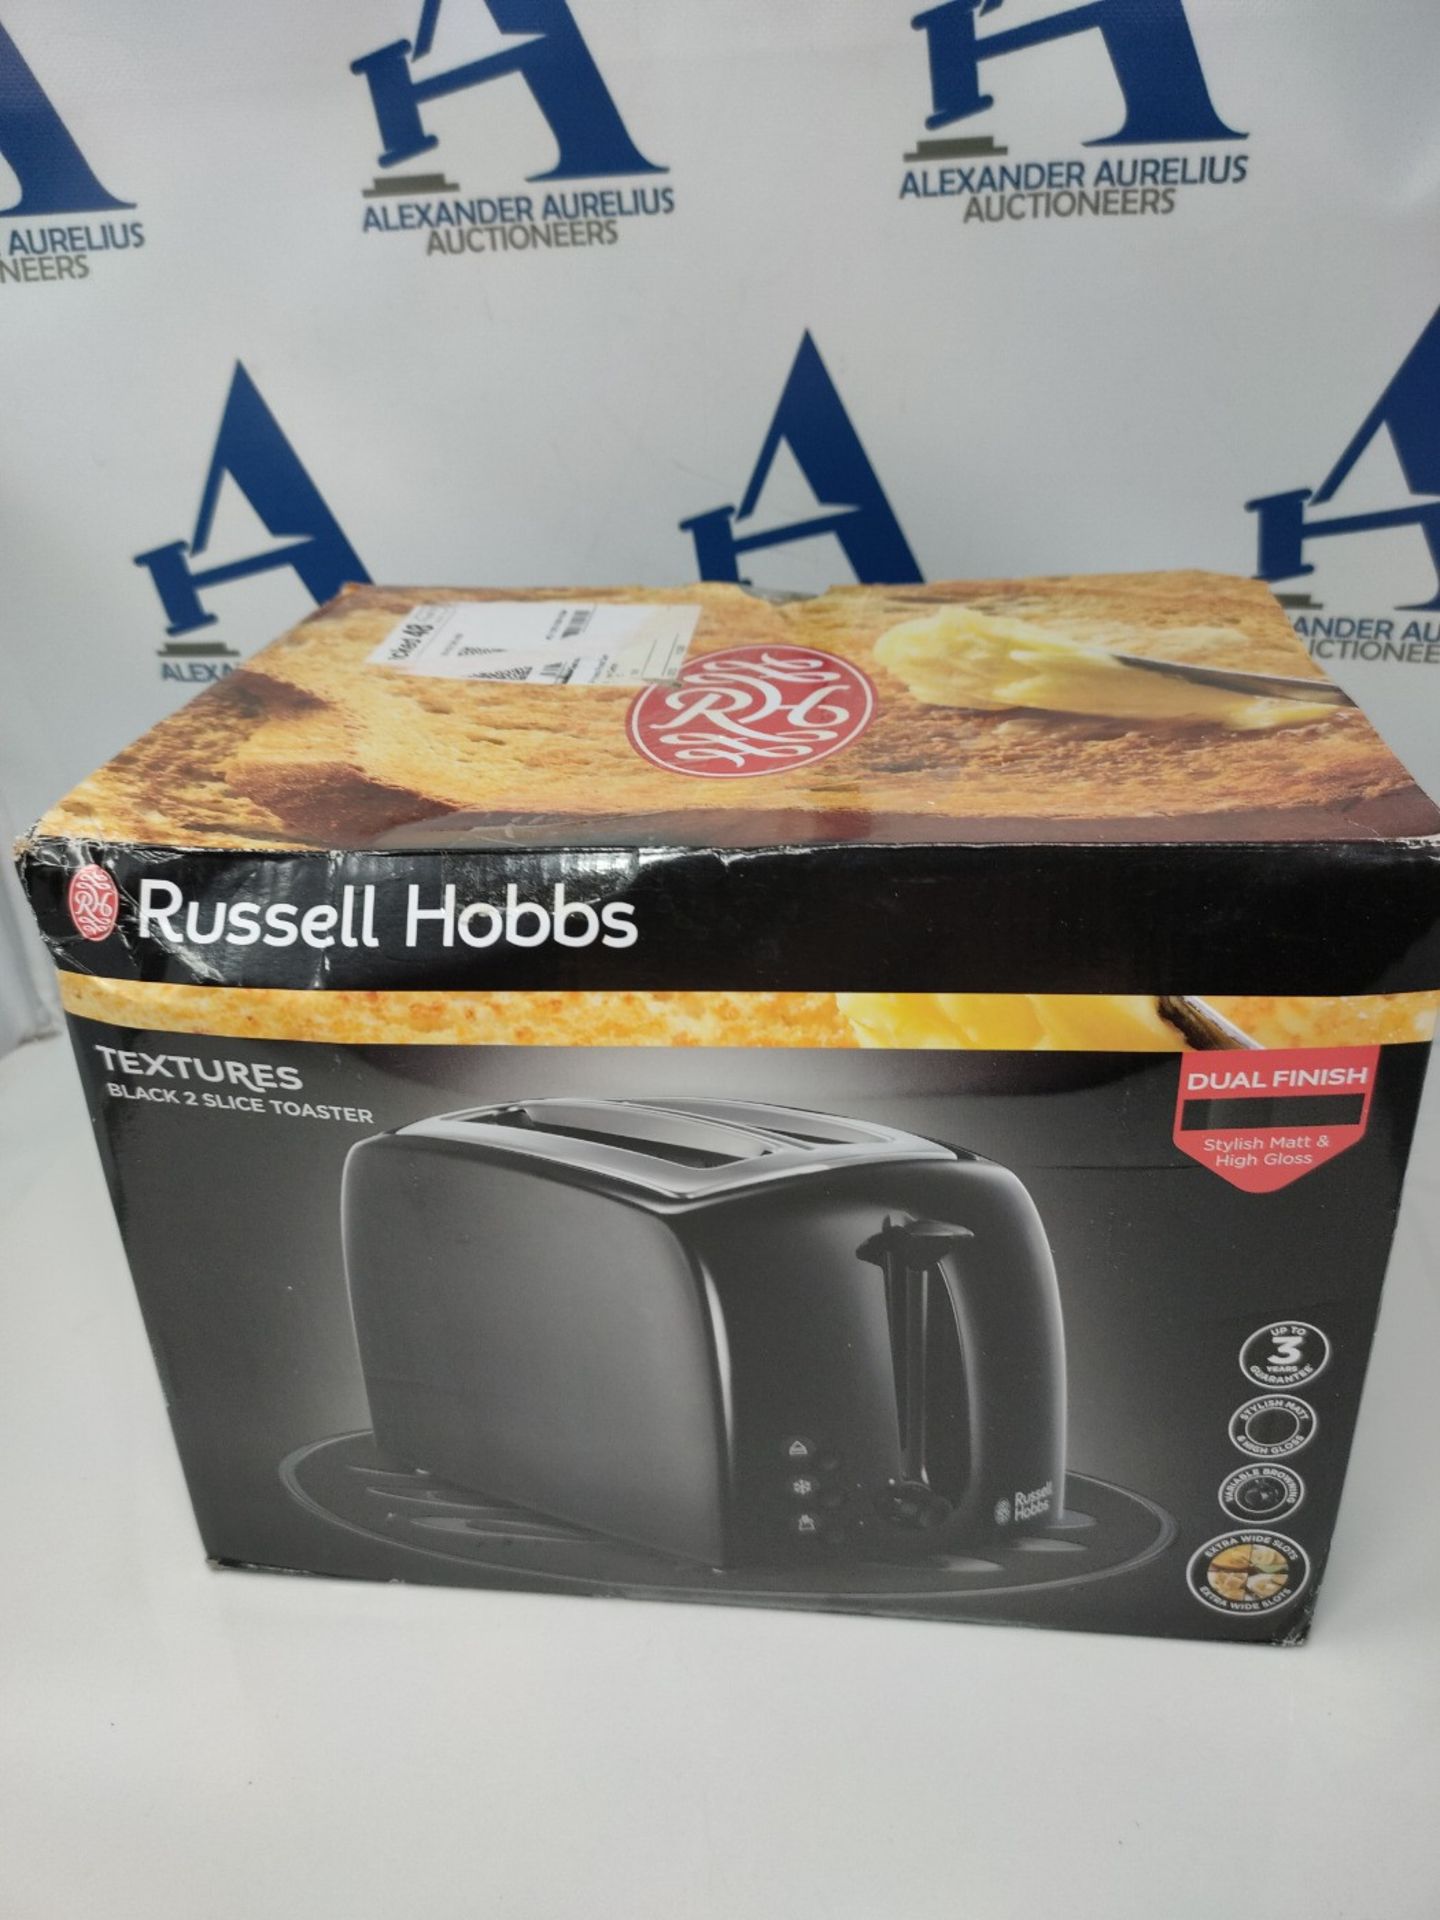 Russell Hobbs 21641 Textures 2-Slice Toaster, 700 - 850 W, Black - Image 2 of 3